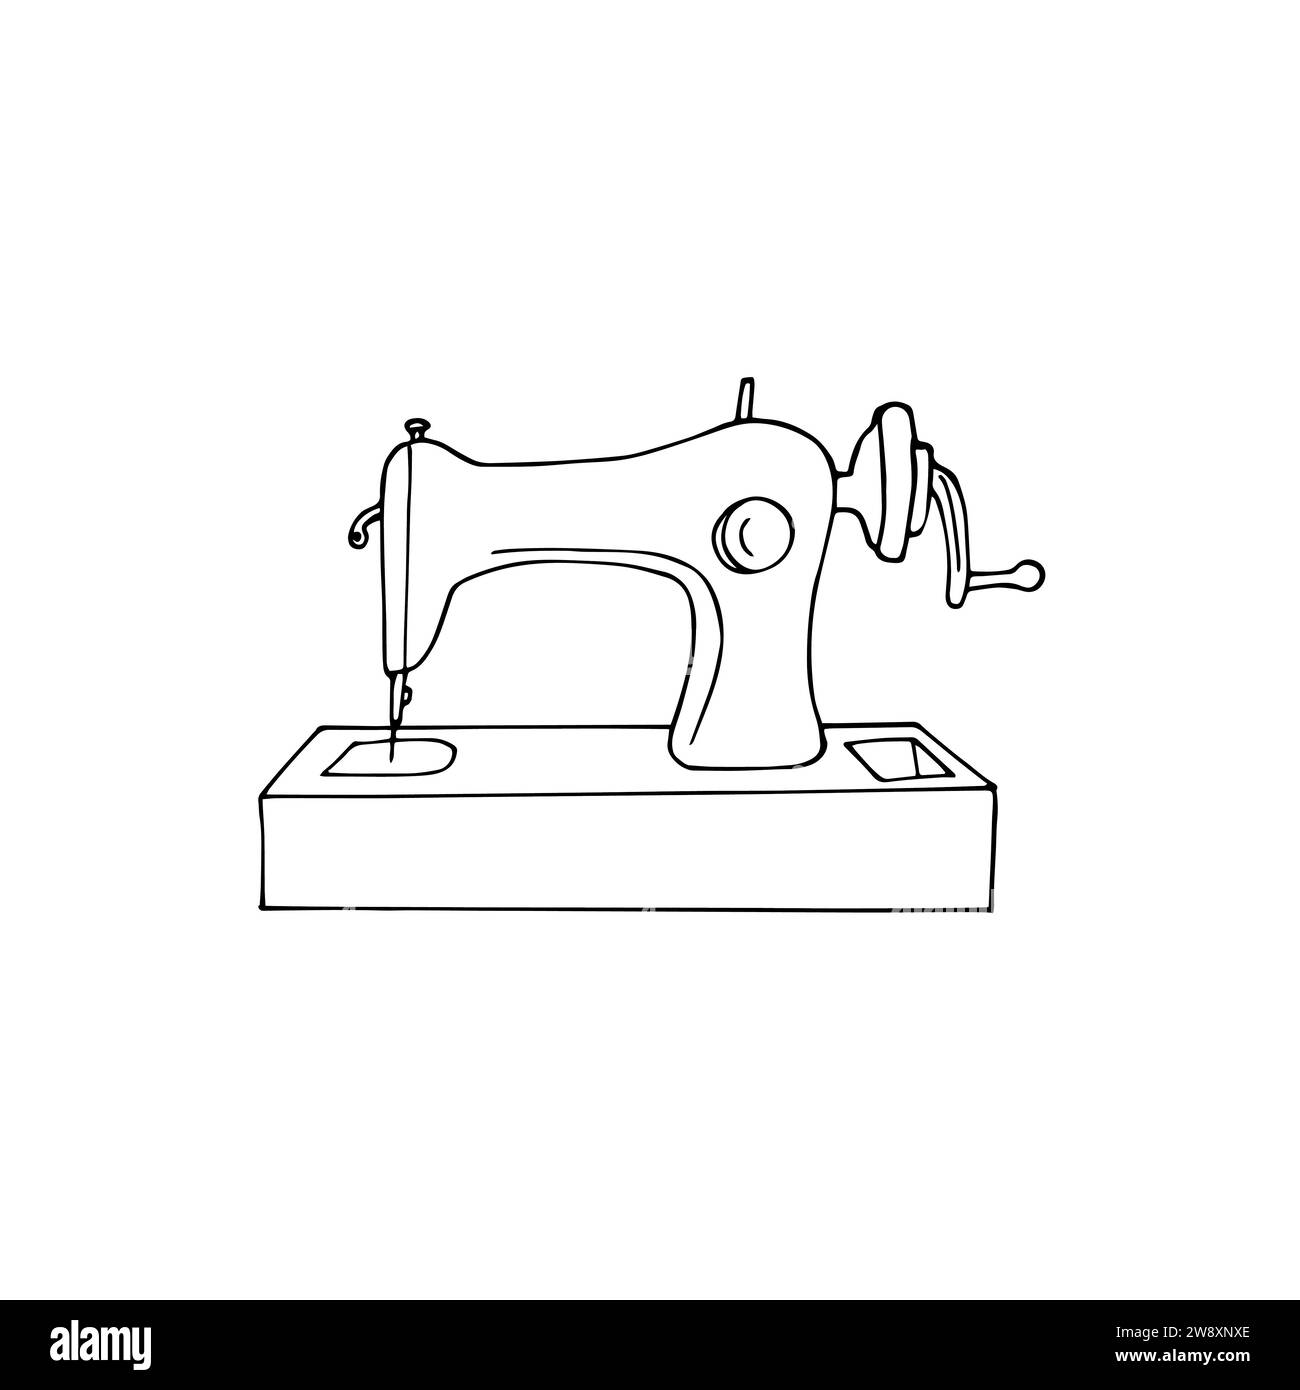 Vintage sewing machine. isolated on a white background.  Hand-drawn old sewing machine illustration. Stock Vector